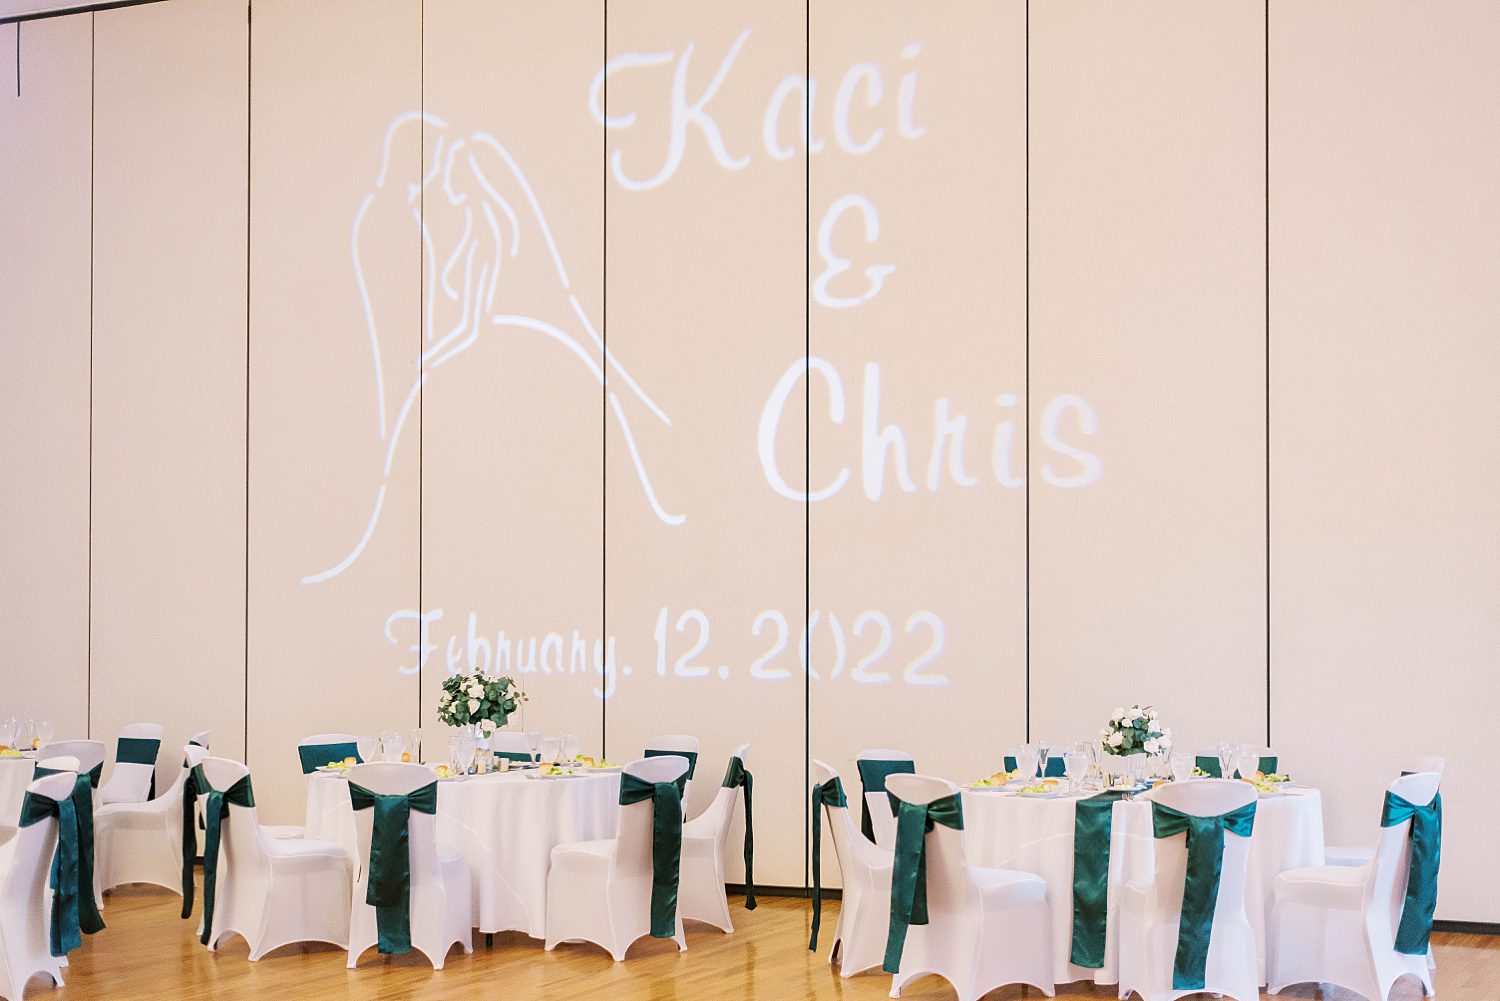 The Regent wedding reception with ivory and emerald green details